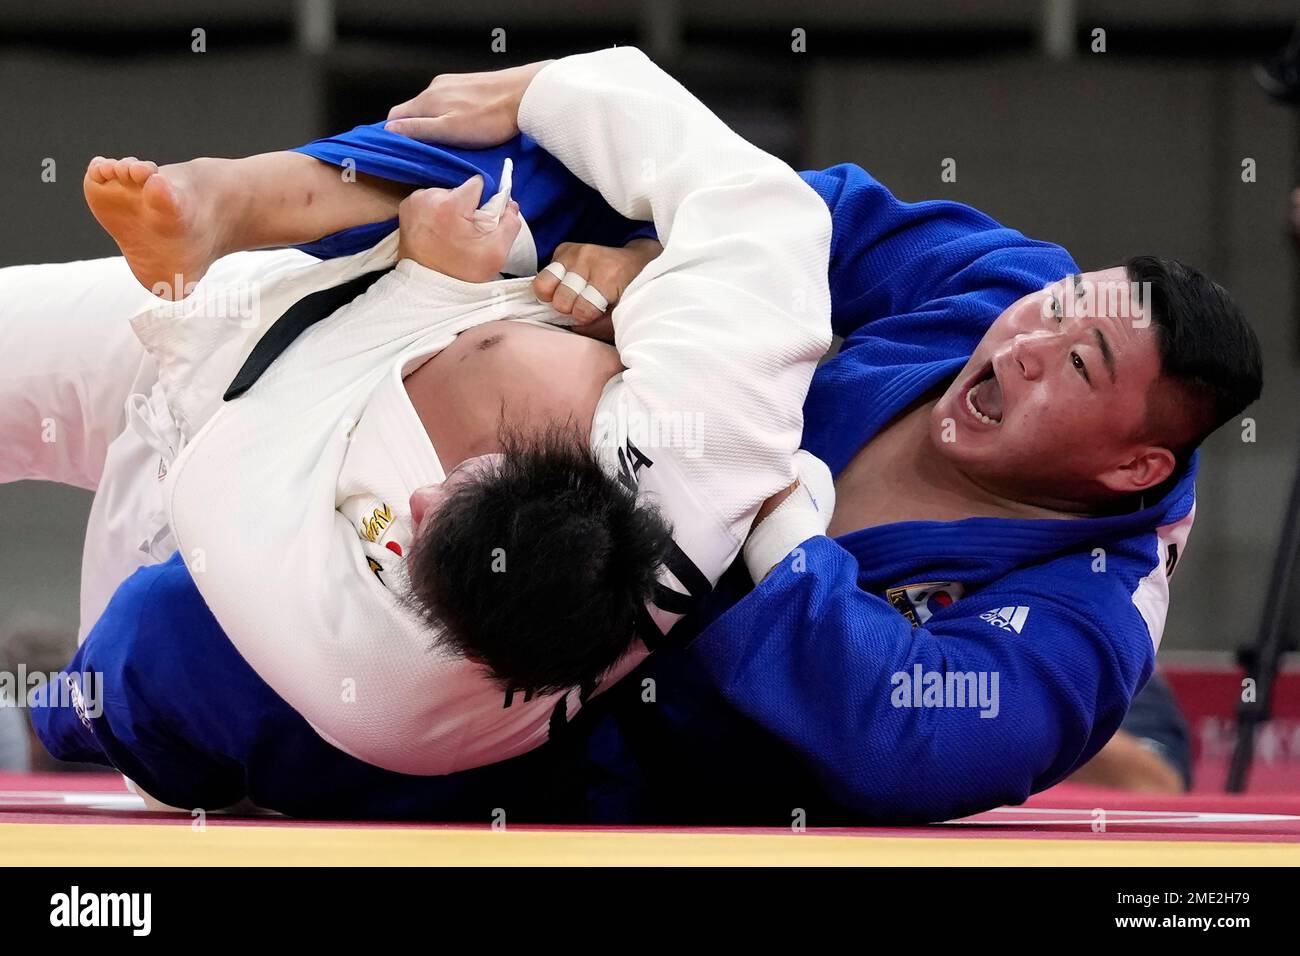 Kim Minjong of South Korea, right, and Hisayoshi Harasawa of Japan compete during their mens +100kg elimination round judo match at the 2020 Summer Olympics, Friday, July 30, 2021, in Tokyo, Japan